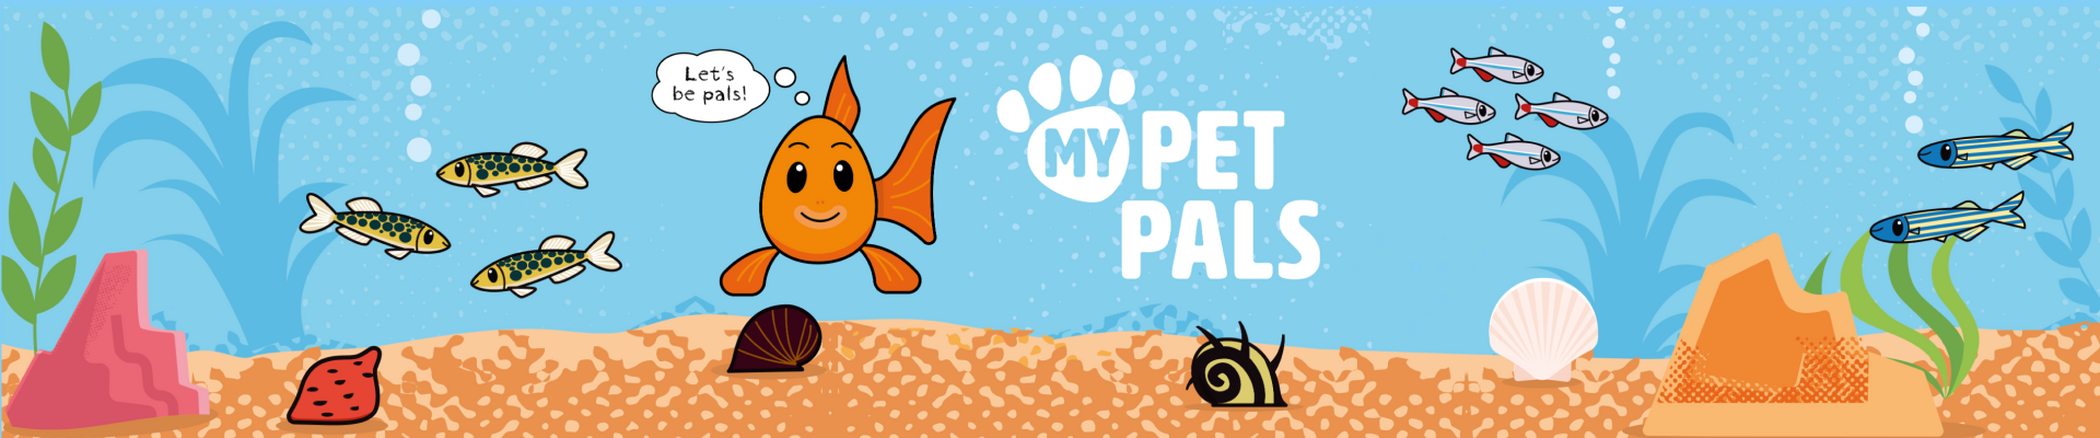 My pet pals join the fun online